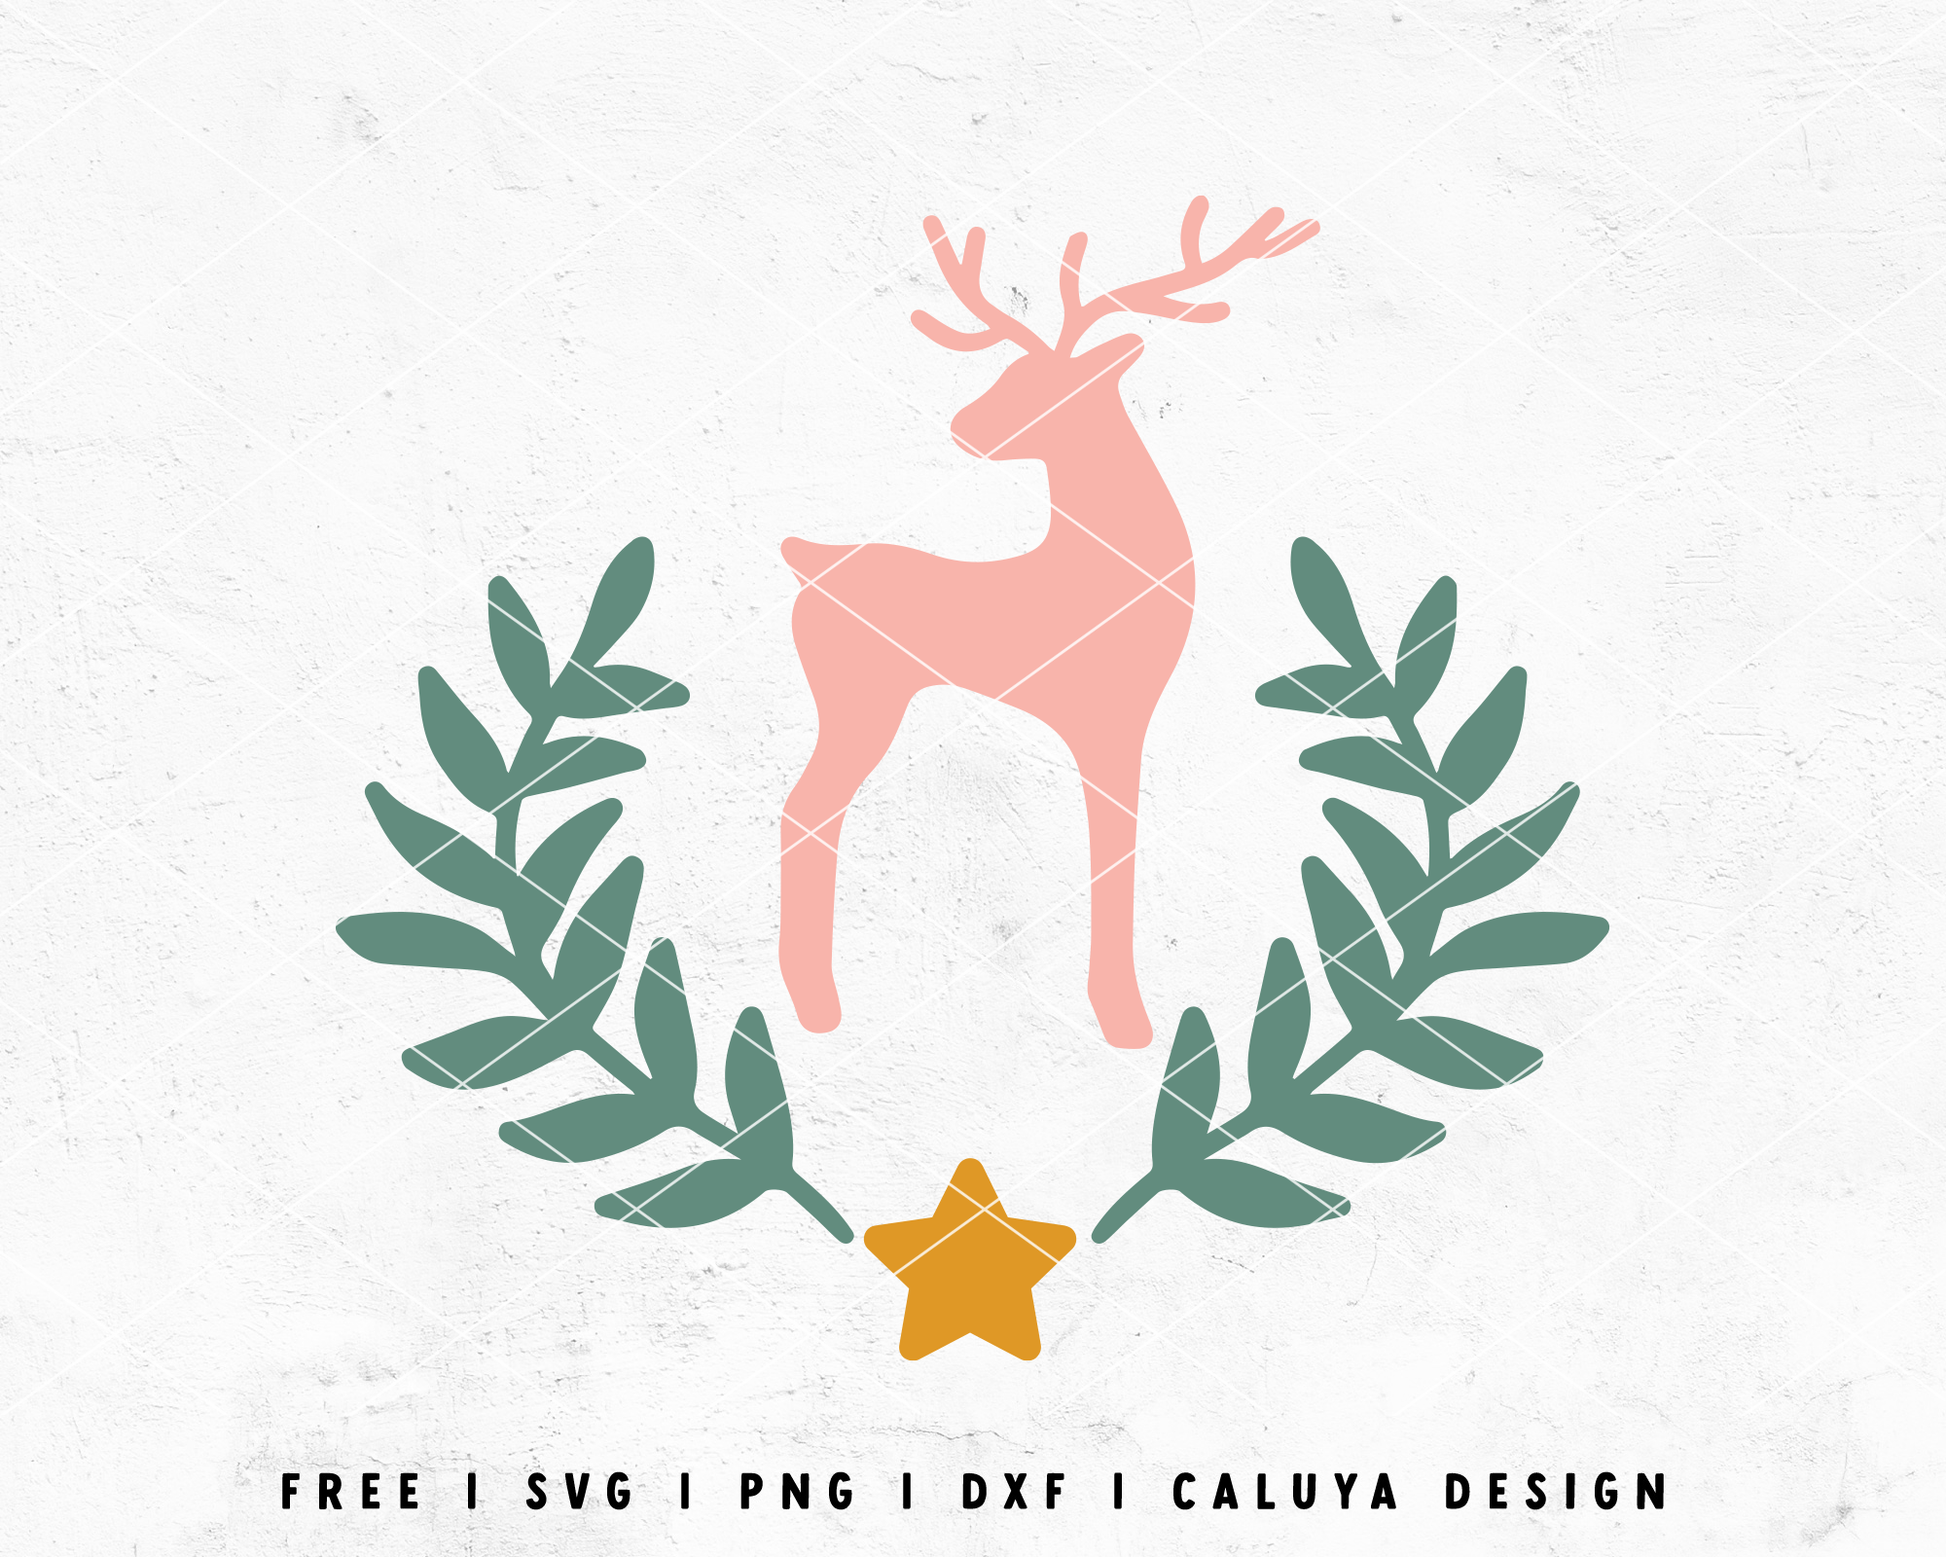 FREE Reindeer SVG | Christmas Wreath SVG Cut File for Cricut, Cameo Silhouette 